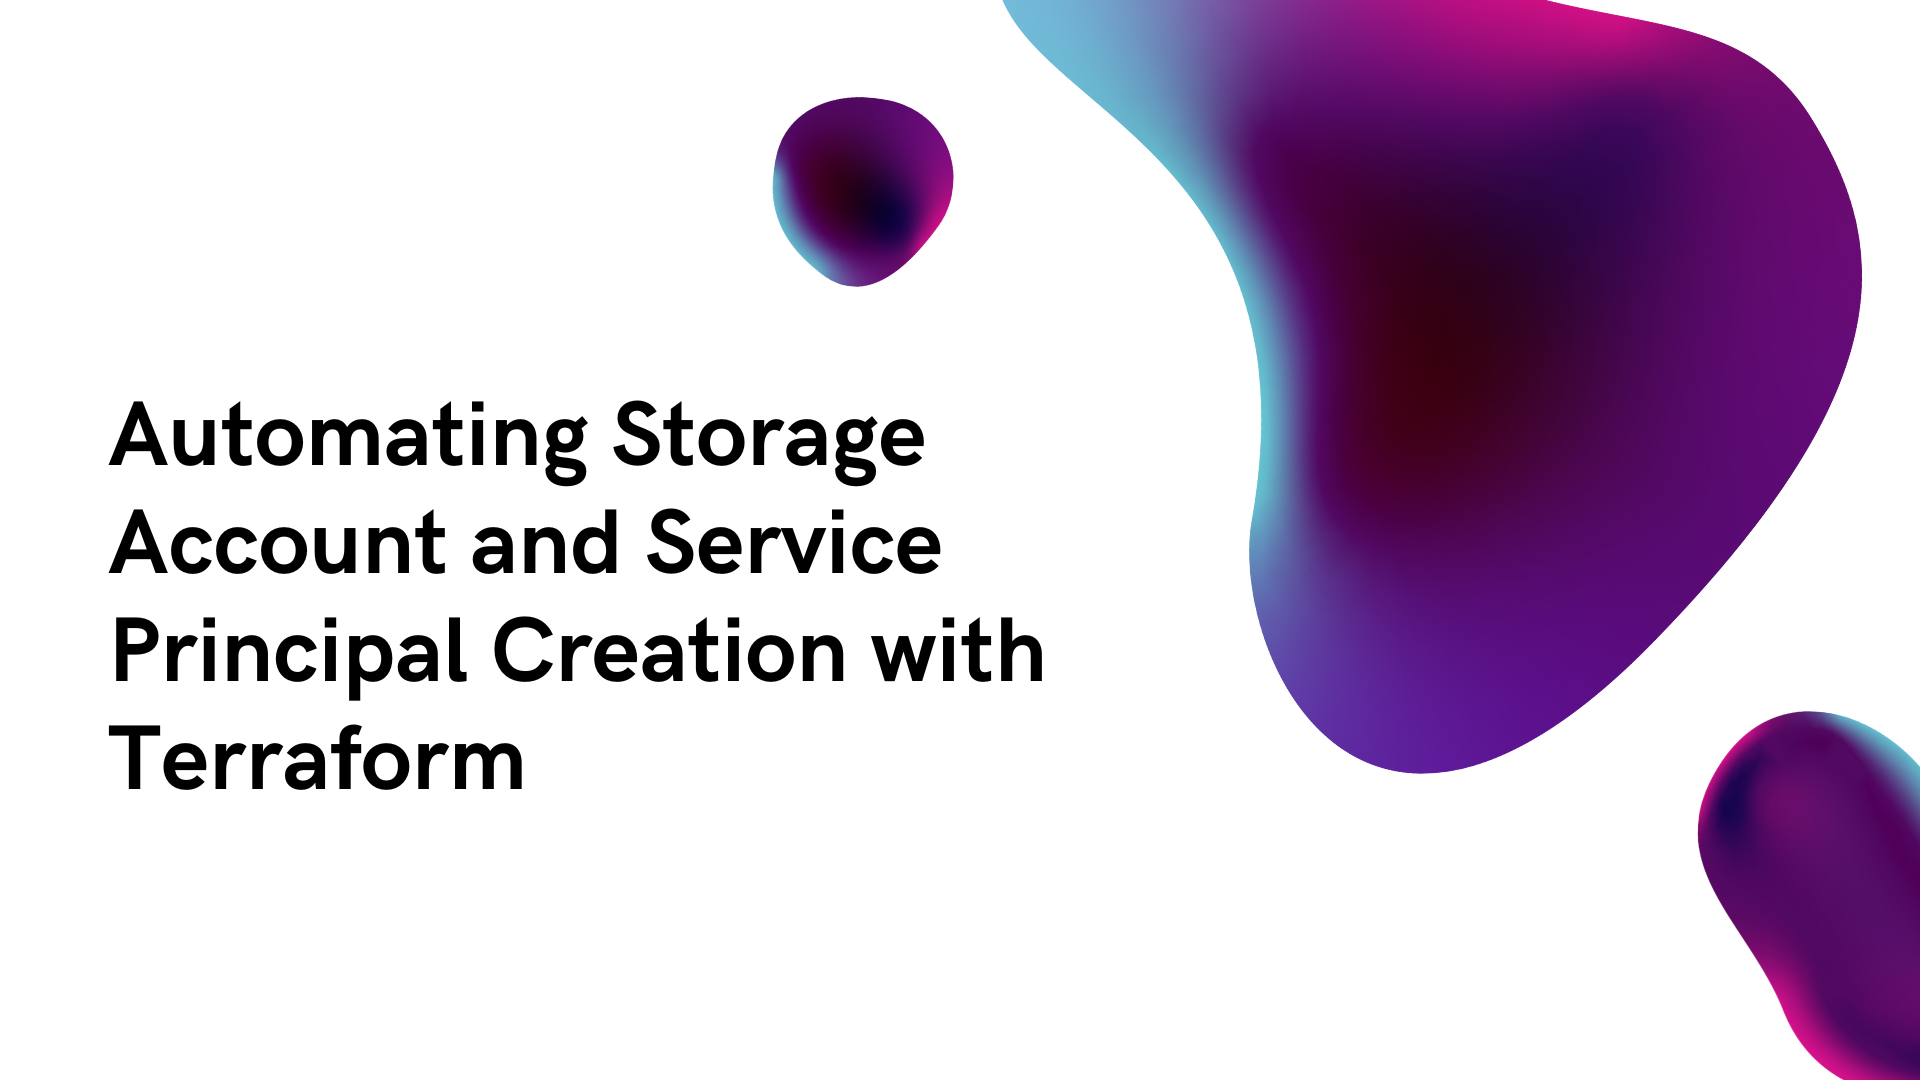 Automating Storage Account and Service Principal Creation with Terraform